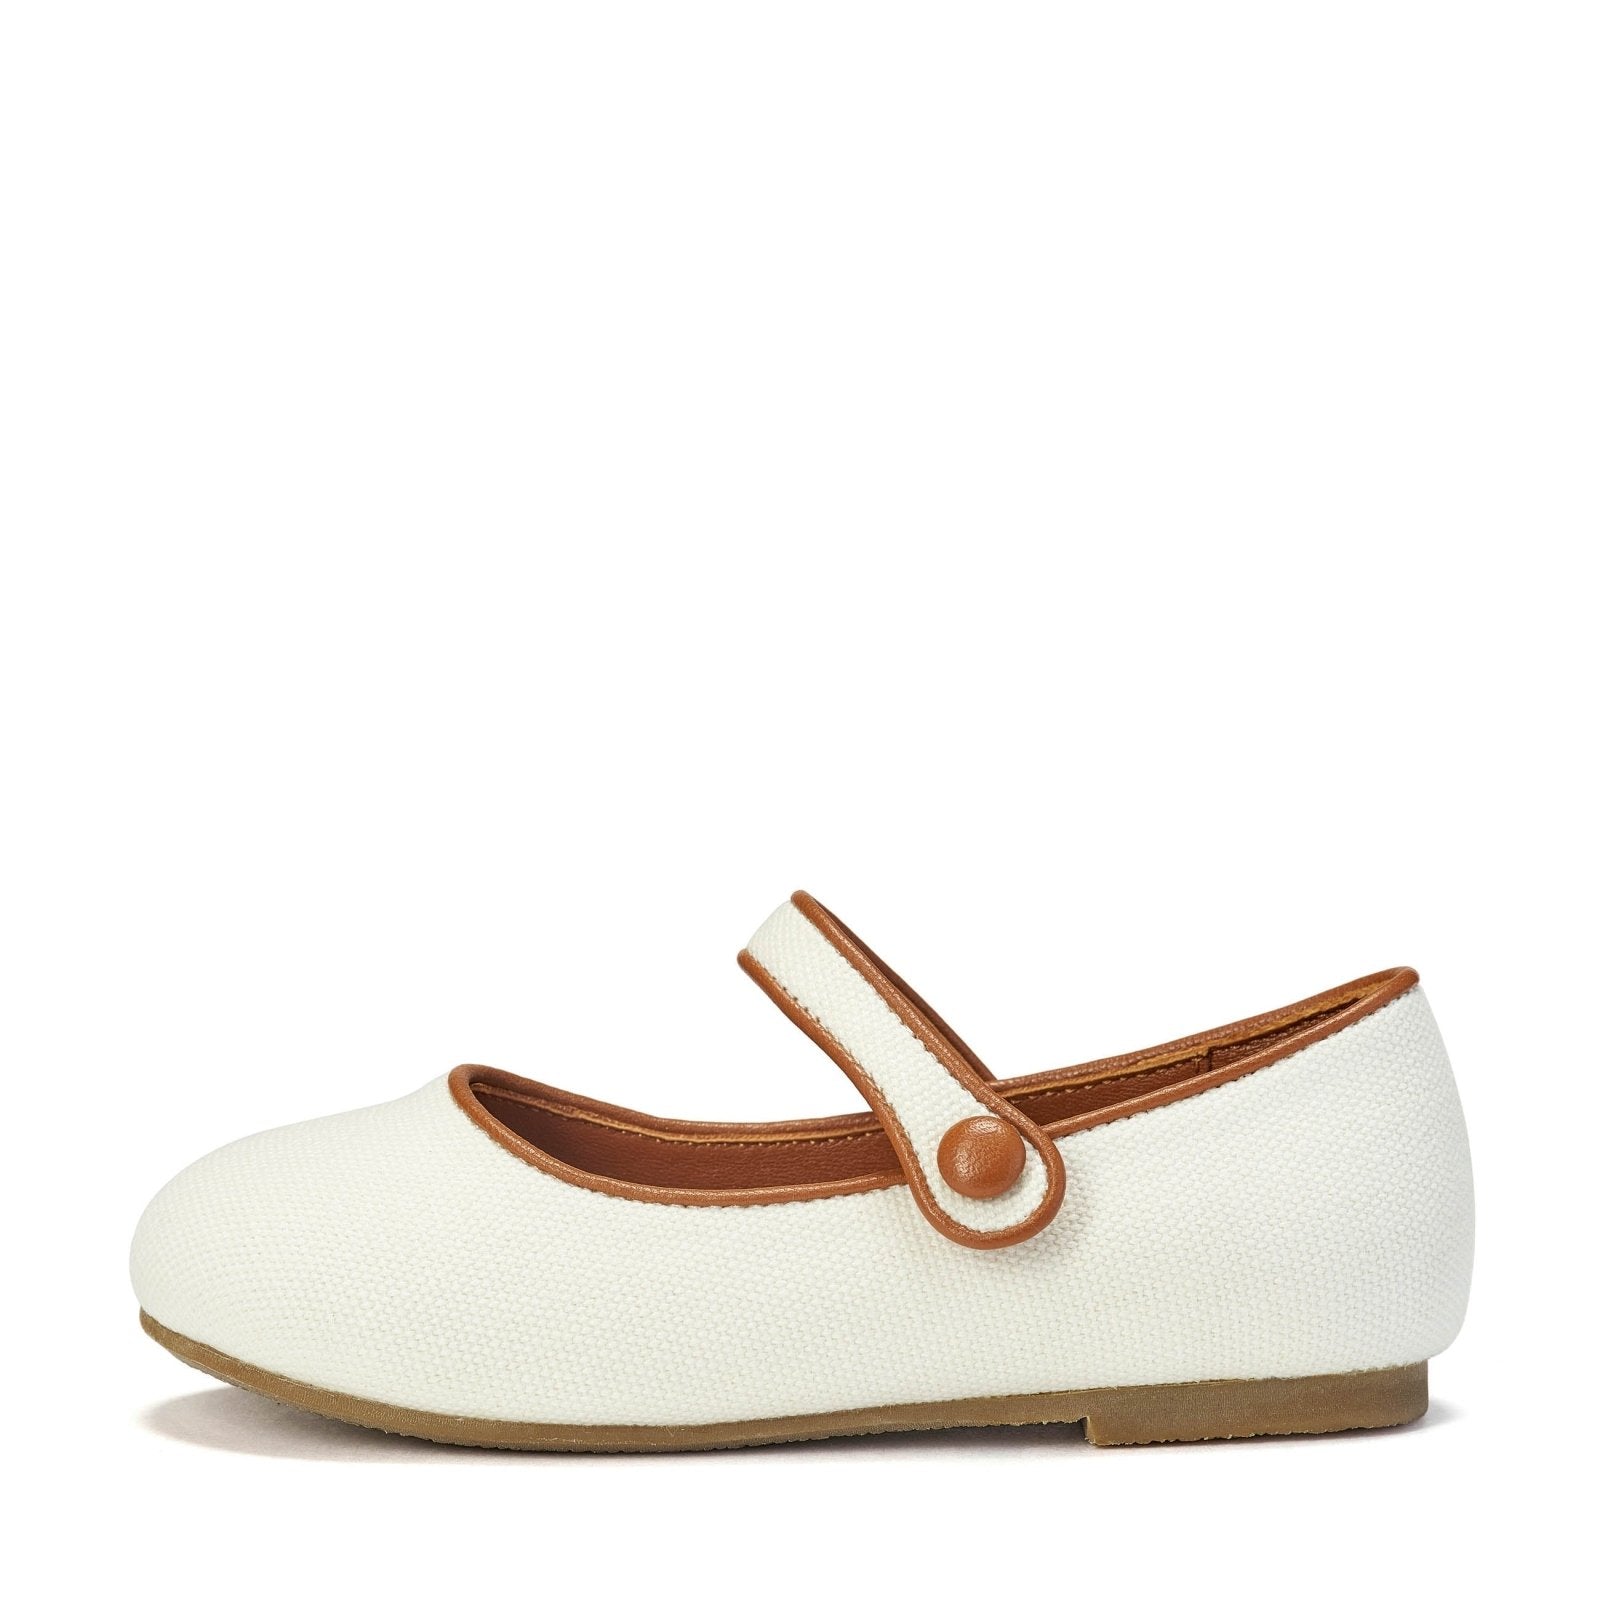 Bianca White/Brown Shoes by Age of Innocence